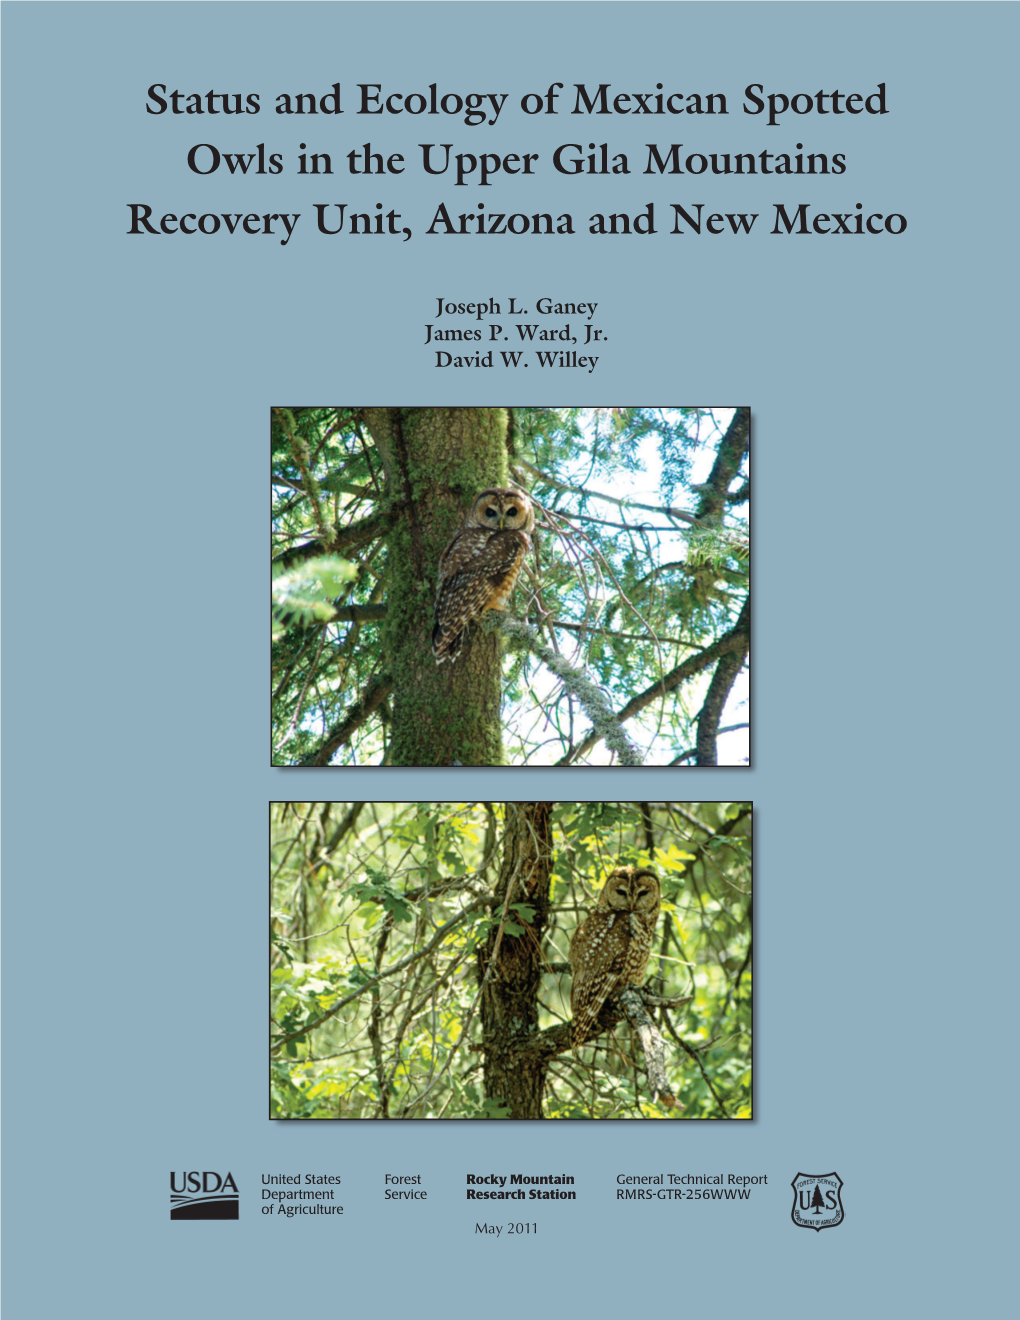 Status and Ecology of Mexican Spotted Owls in the Upper Gila Mountains Recovery Unit, Arizona and New Mexico